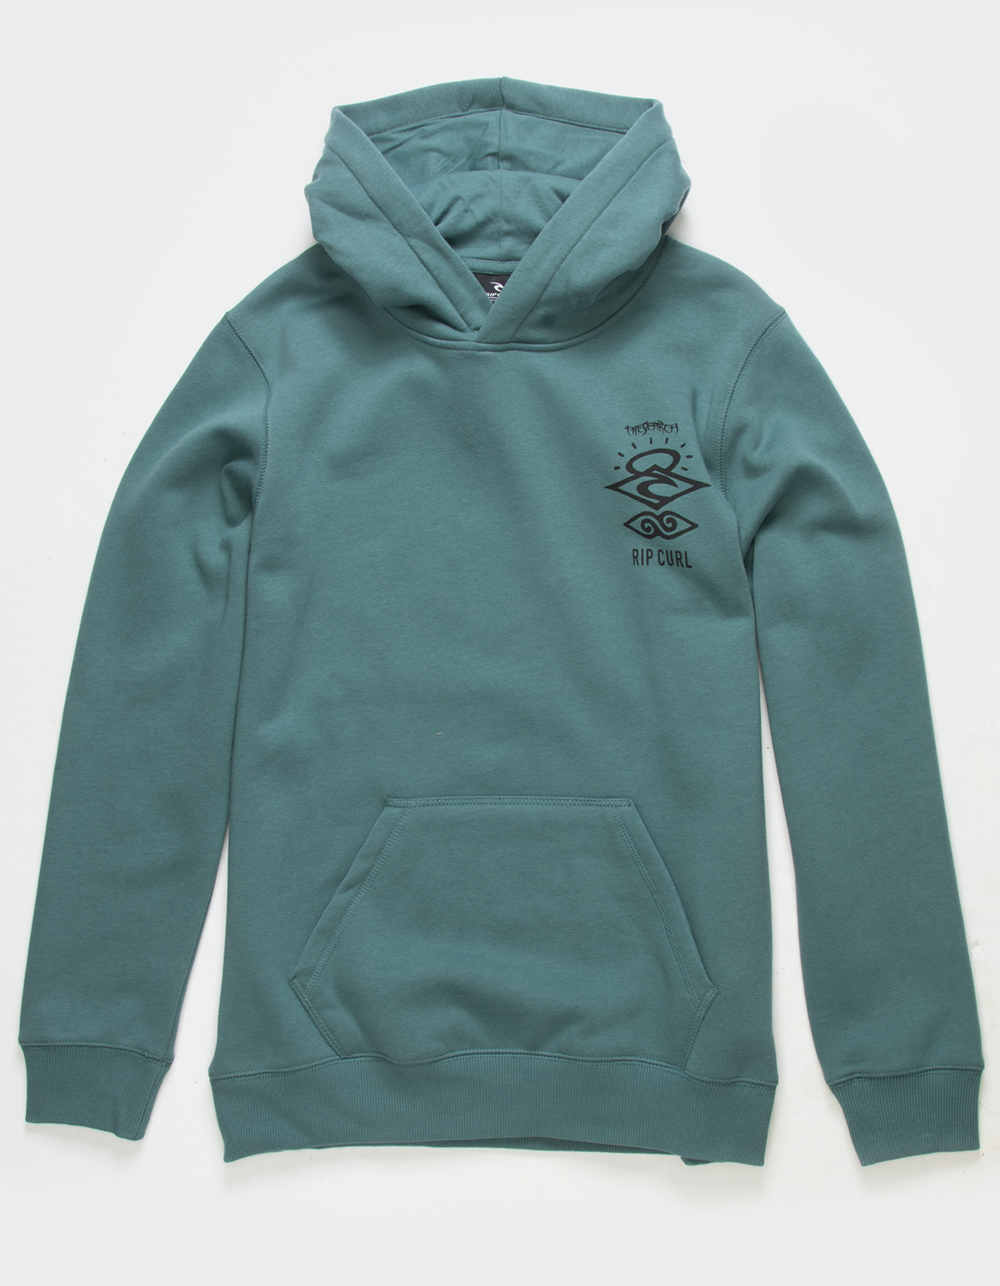 RIP CURL Search Icon Boys Hoodie - SLATE BLUE | Tillys